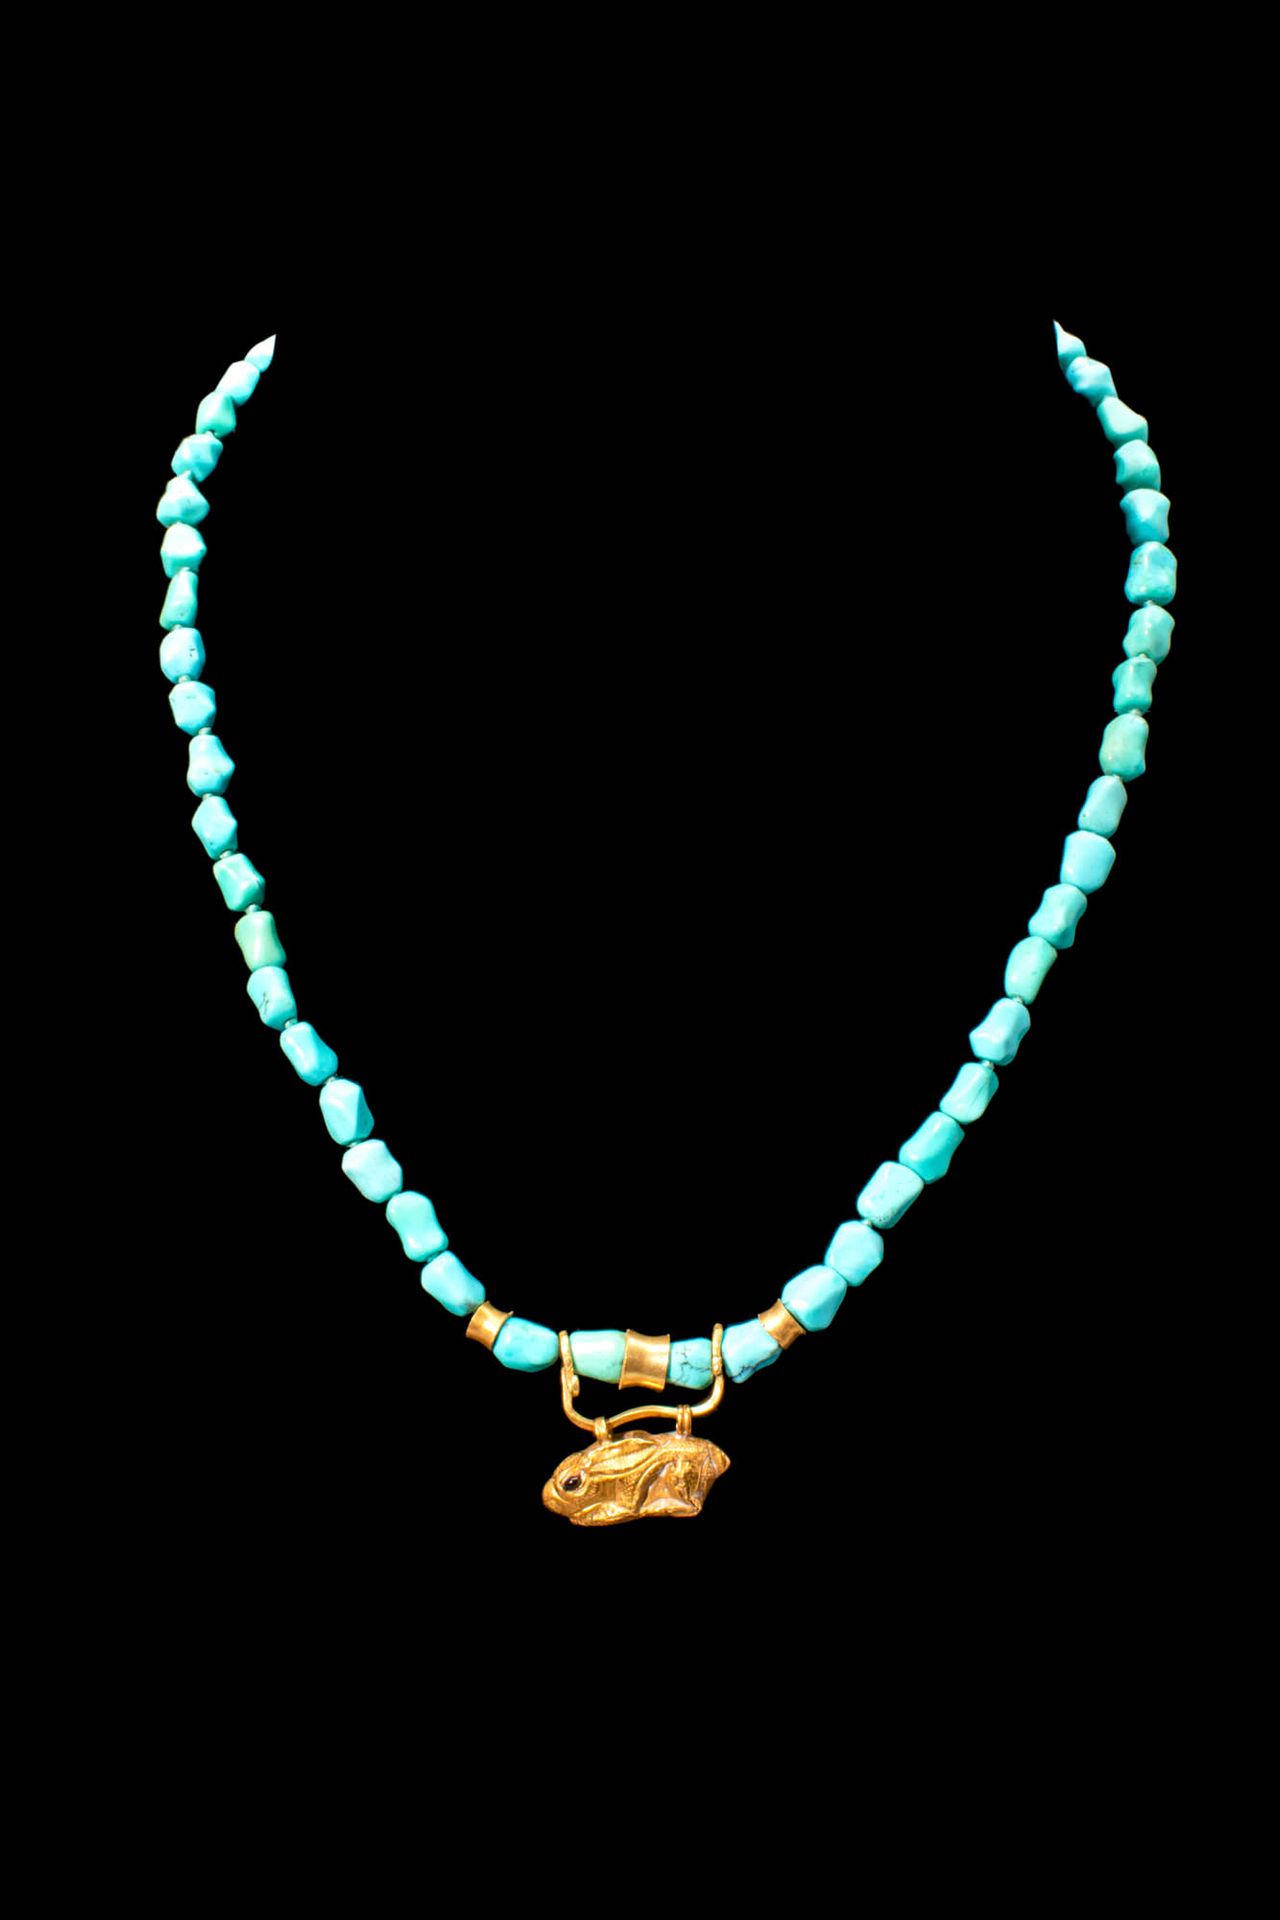 RARE EGYPTIAN TURQUOISE AND GOLD NECKLACE WITH A RABBIT PENDANT Fin de la périod&hellip;